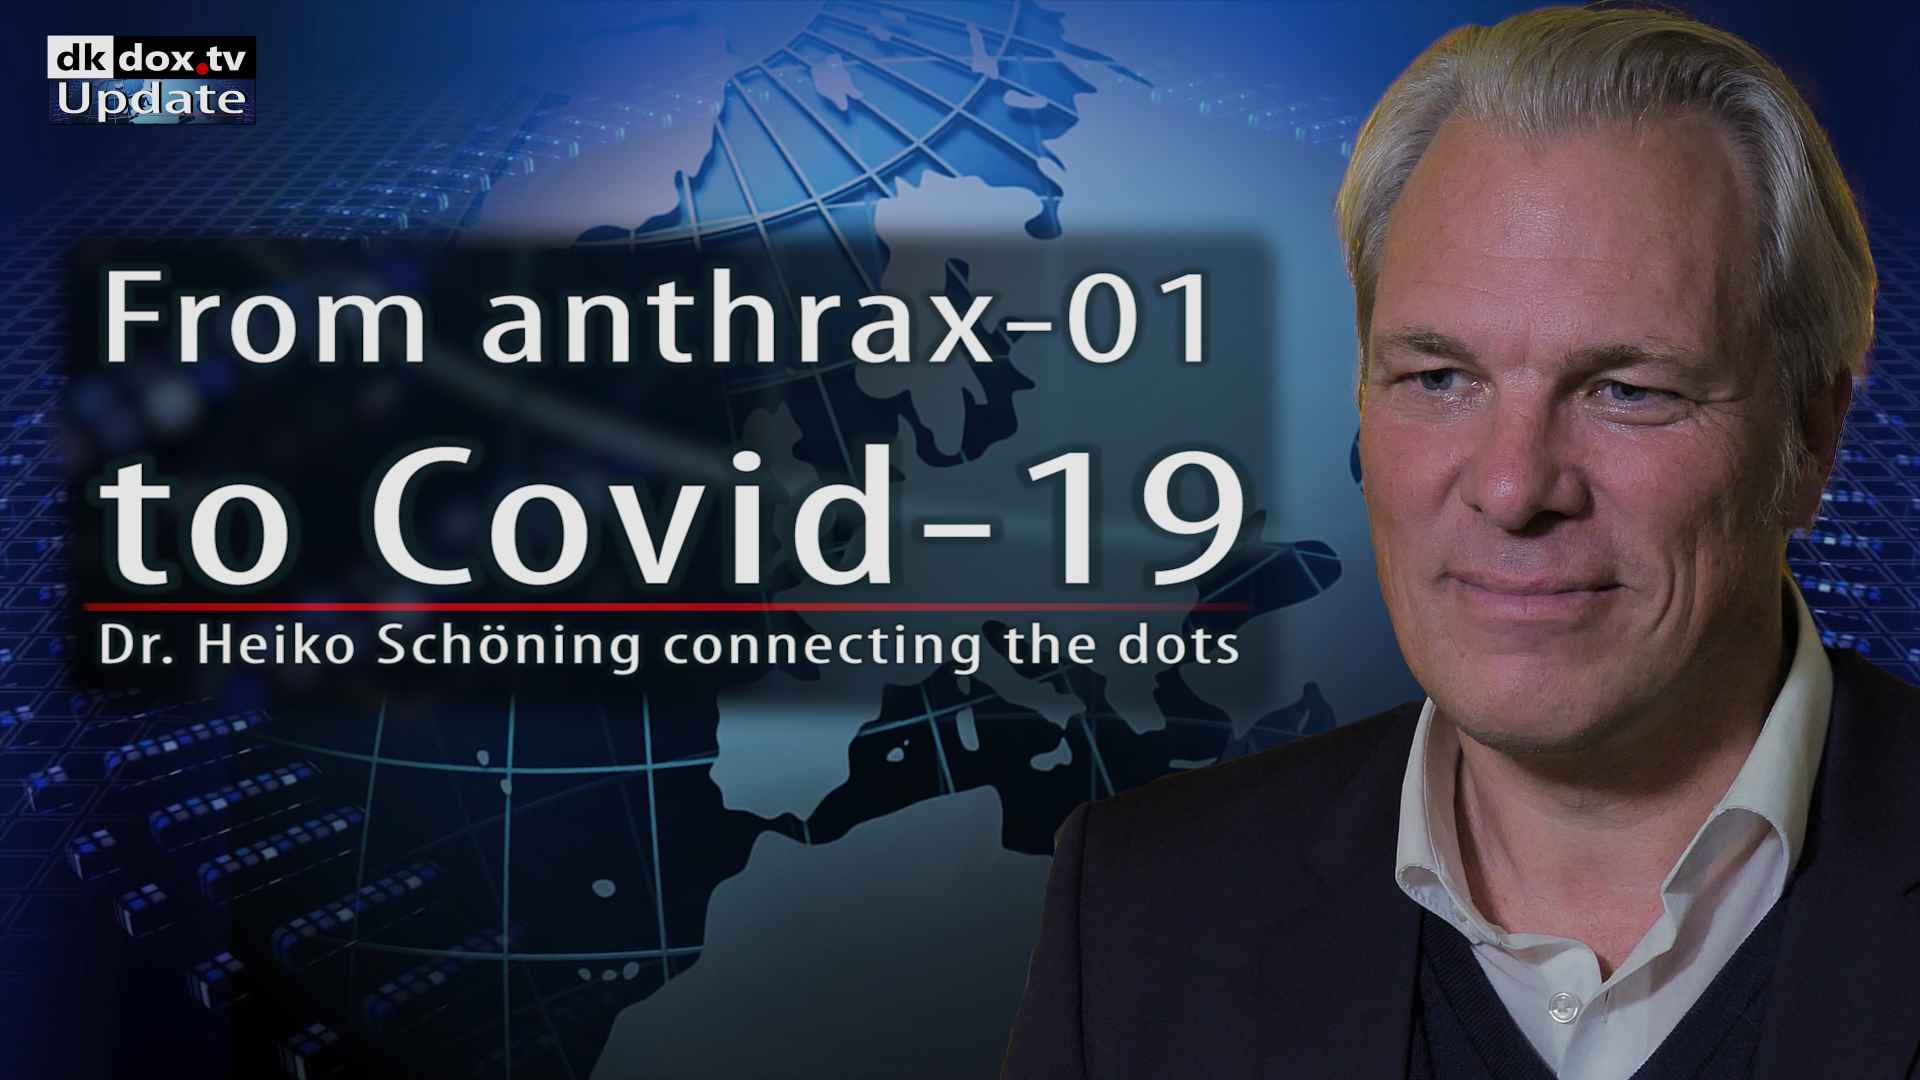 From anthrax-01 to Covid-19